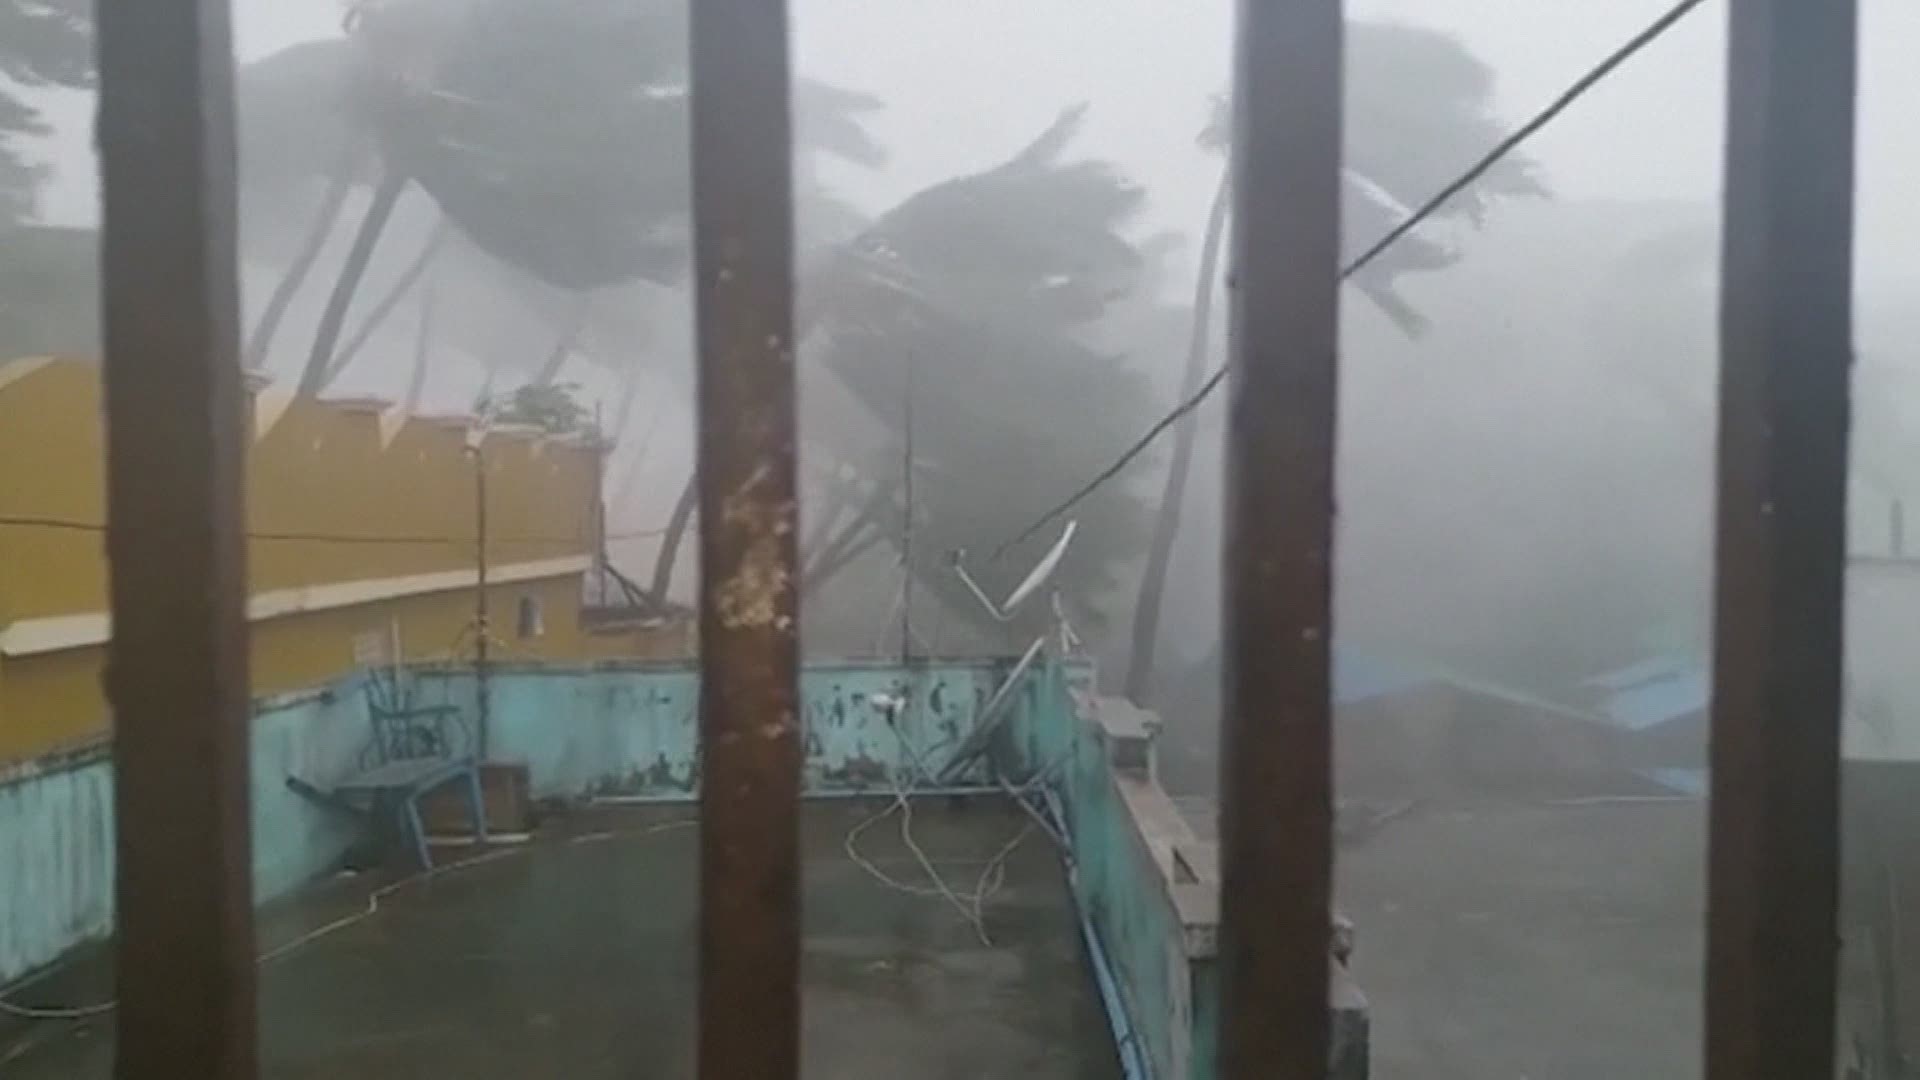 Cyclone Fani has made landfall on India's eastern coast as a grade 5 storm, lashing the emptied beaches with rain and wind gusting up to 205 kilometers (127 miles) per hour.